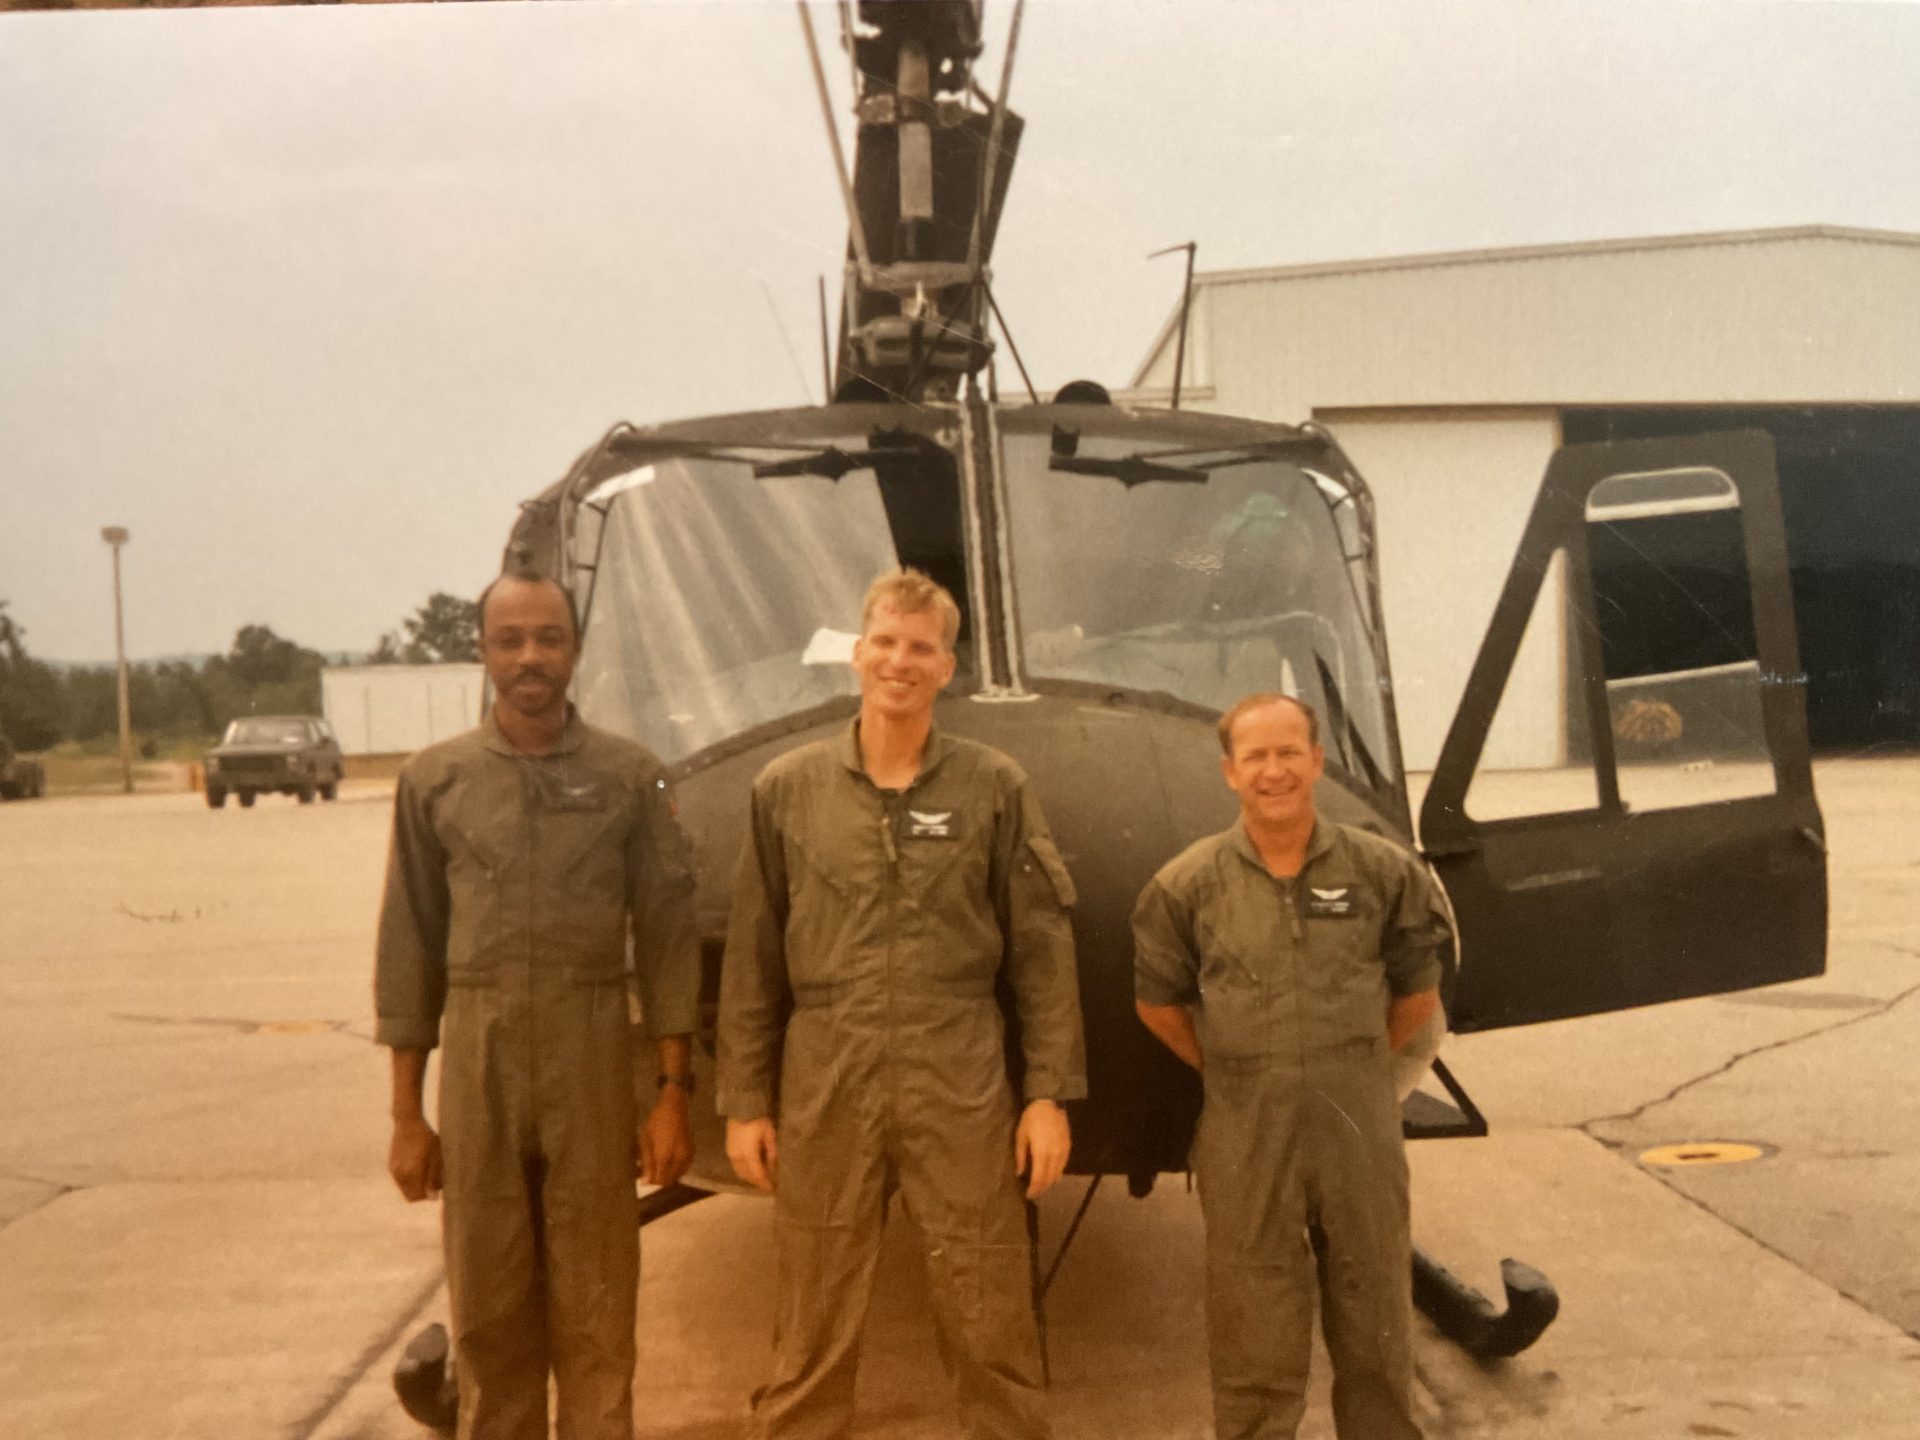 Don (Mr. Dorsey) to the right myself center and Sgt. J on the left. This was taken in the summer of 1988 at Ft. McCoy, Wisconsin.  I just loved flying with Don. He was always happy and such a pleasure to be around.  What a fantastic guy. You no longer have to worry about A10s almost colliding with us my friend.